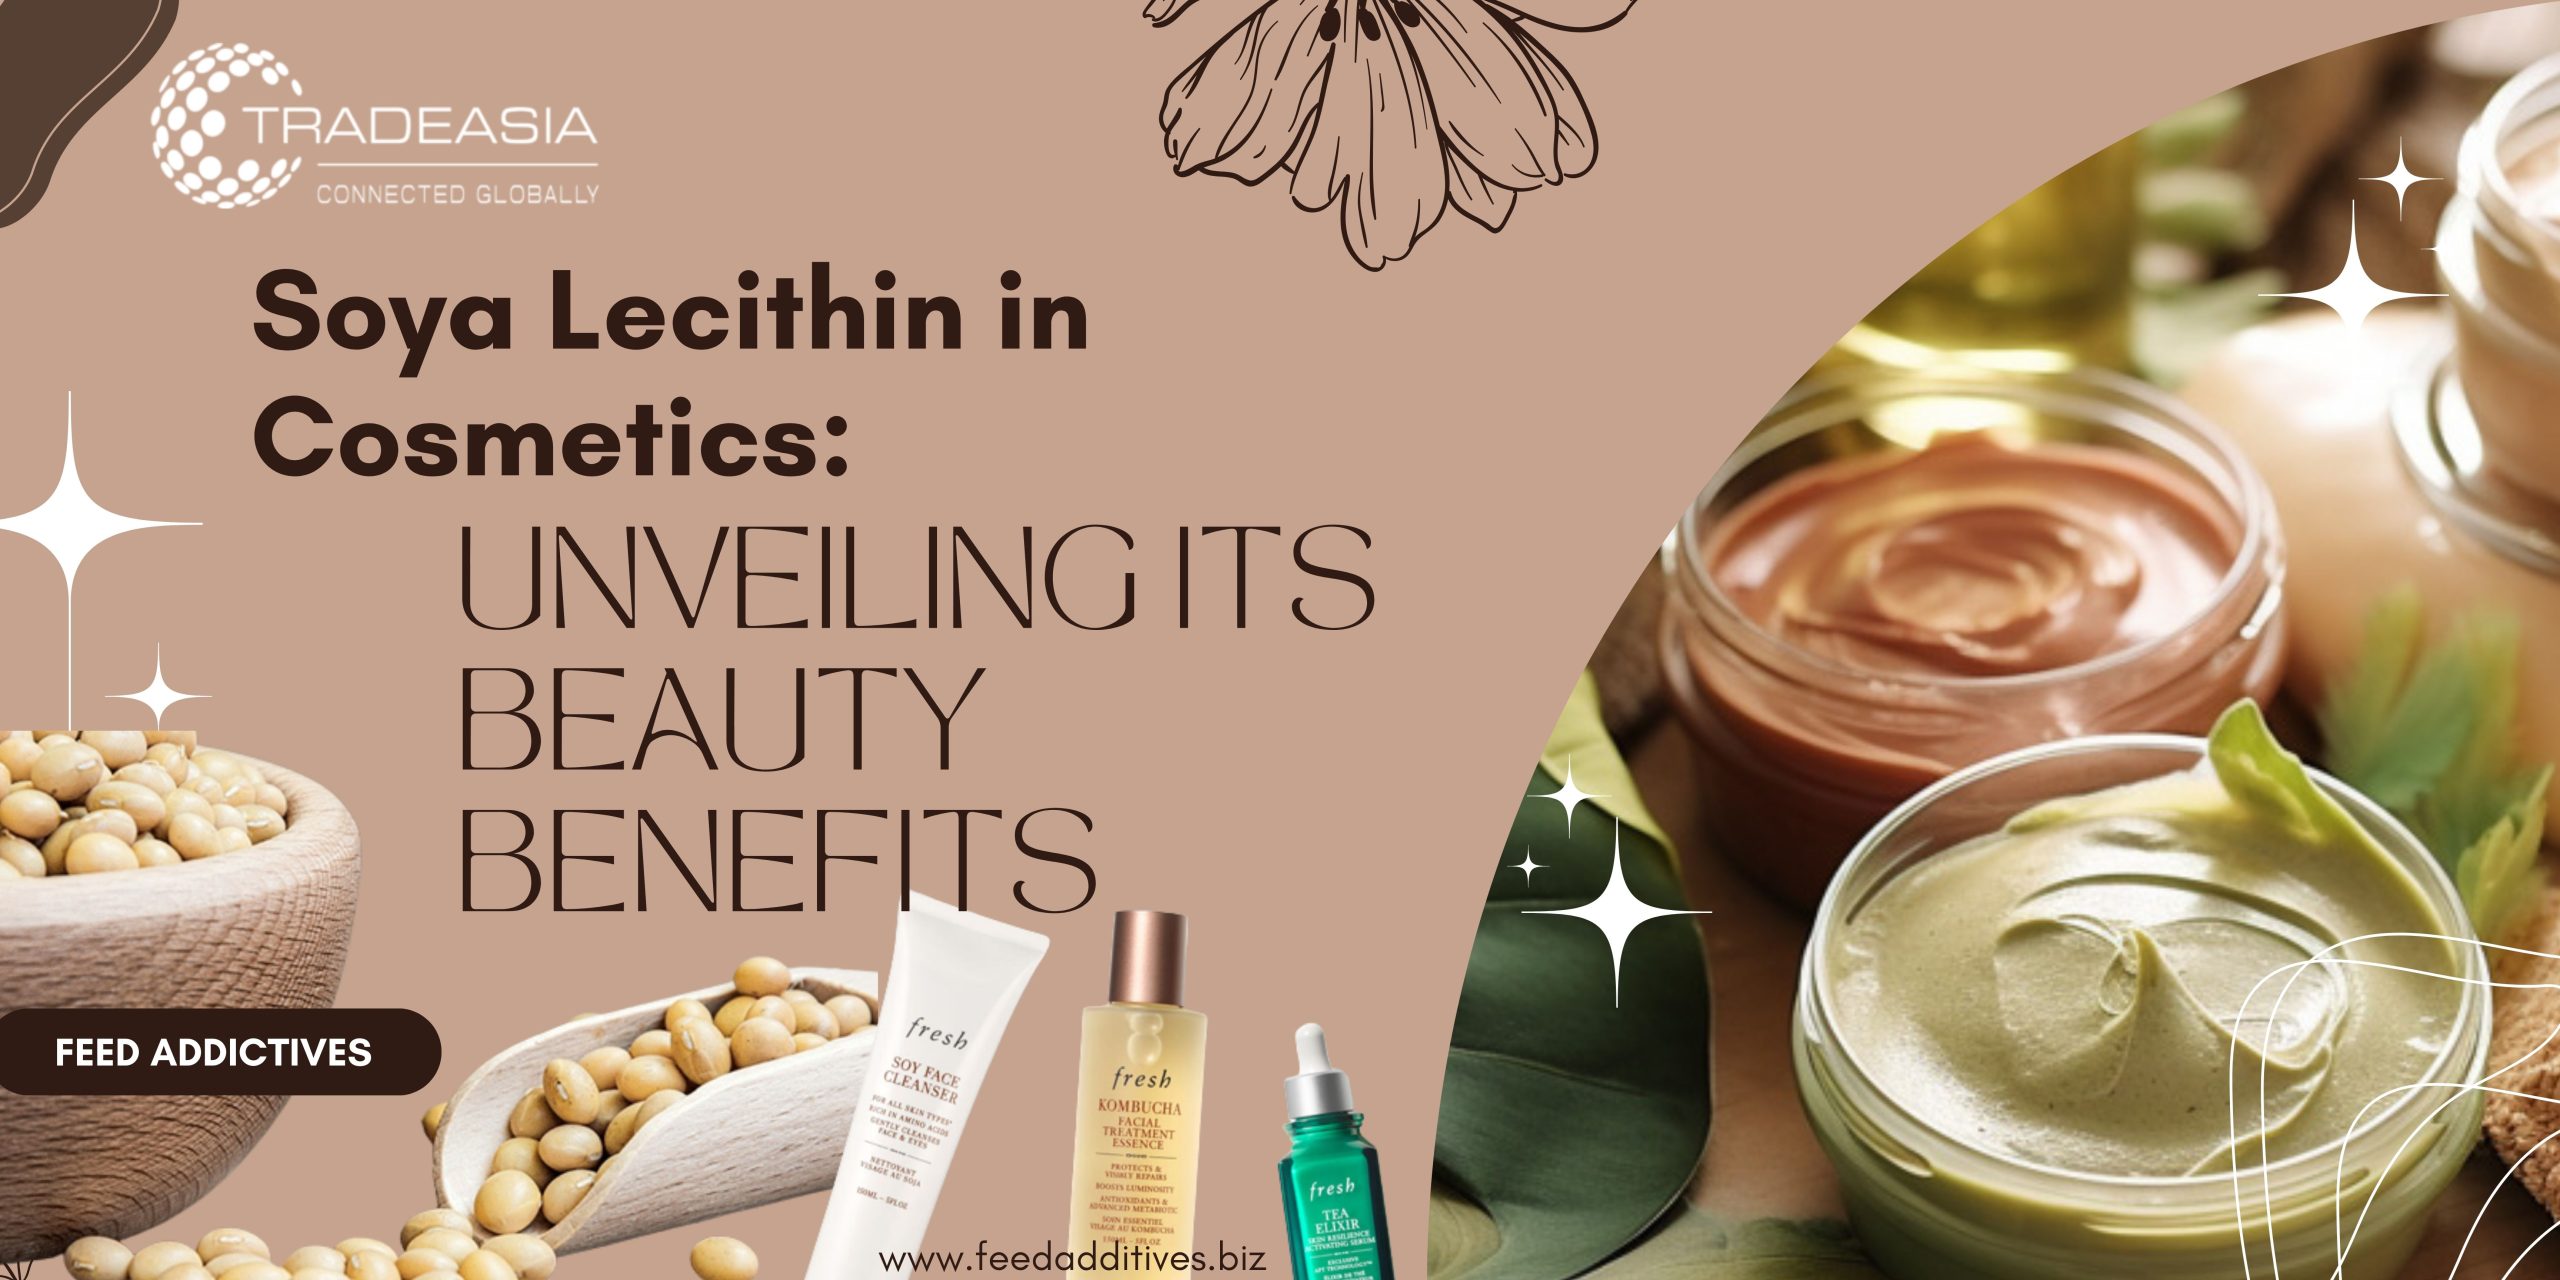 Soya Lecithin in Cosmetics: Unveiling its Beauty Benefits